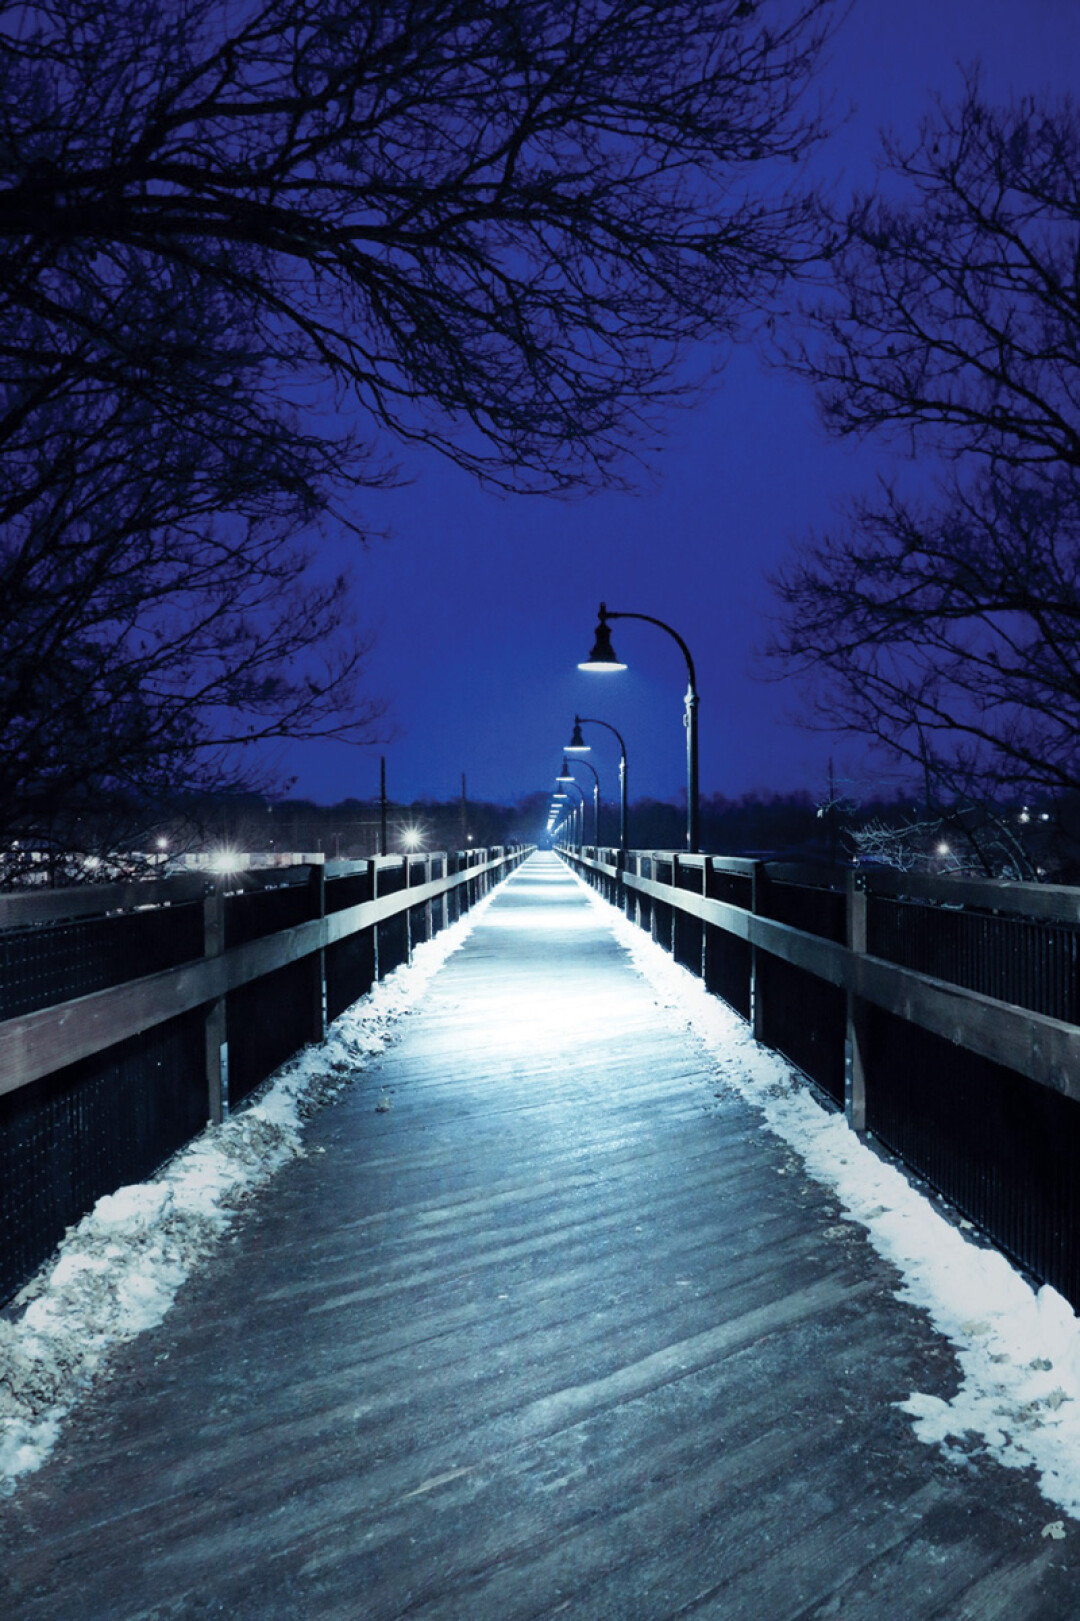 HIGH AND LONESOME. A recent shot of the High Bridge in Eau Claire on a chilly night. The new-ish pedestrian bridge has continued to be a popular spot for walkers and sightseers throughout winter.